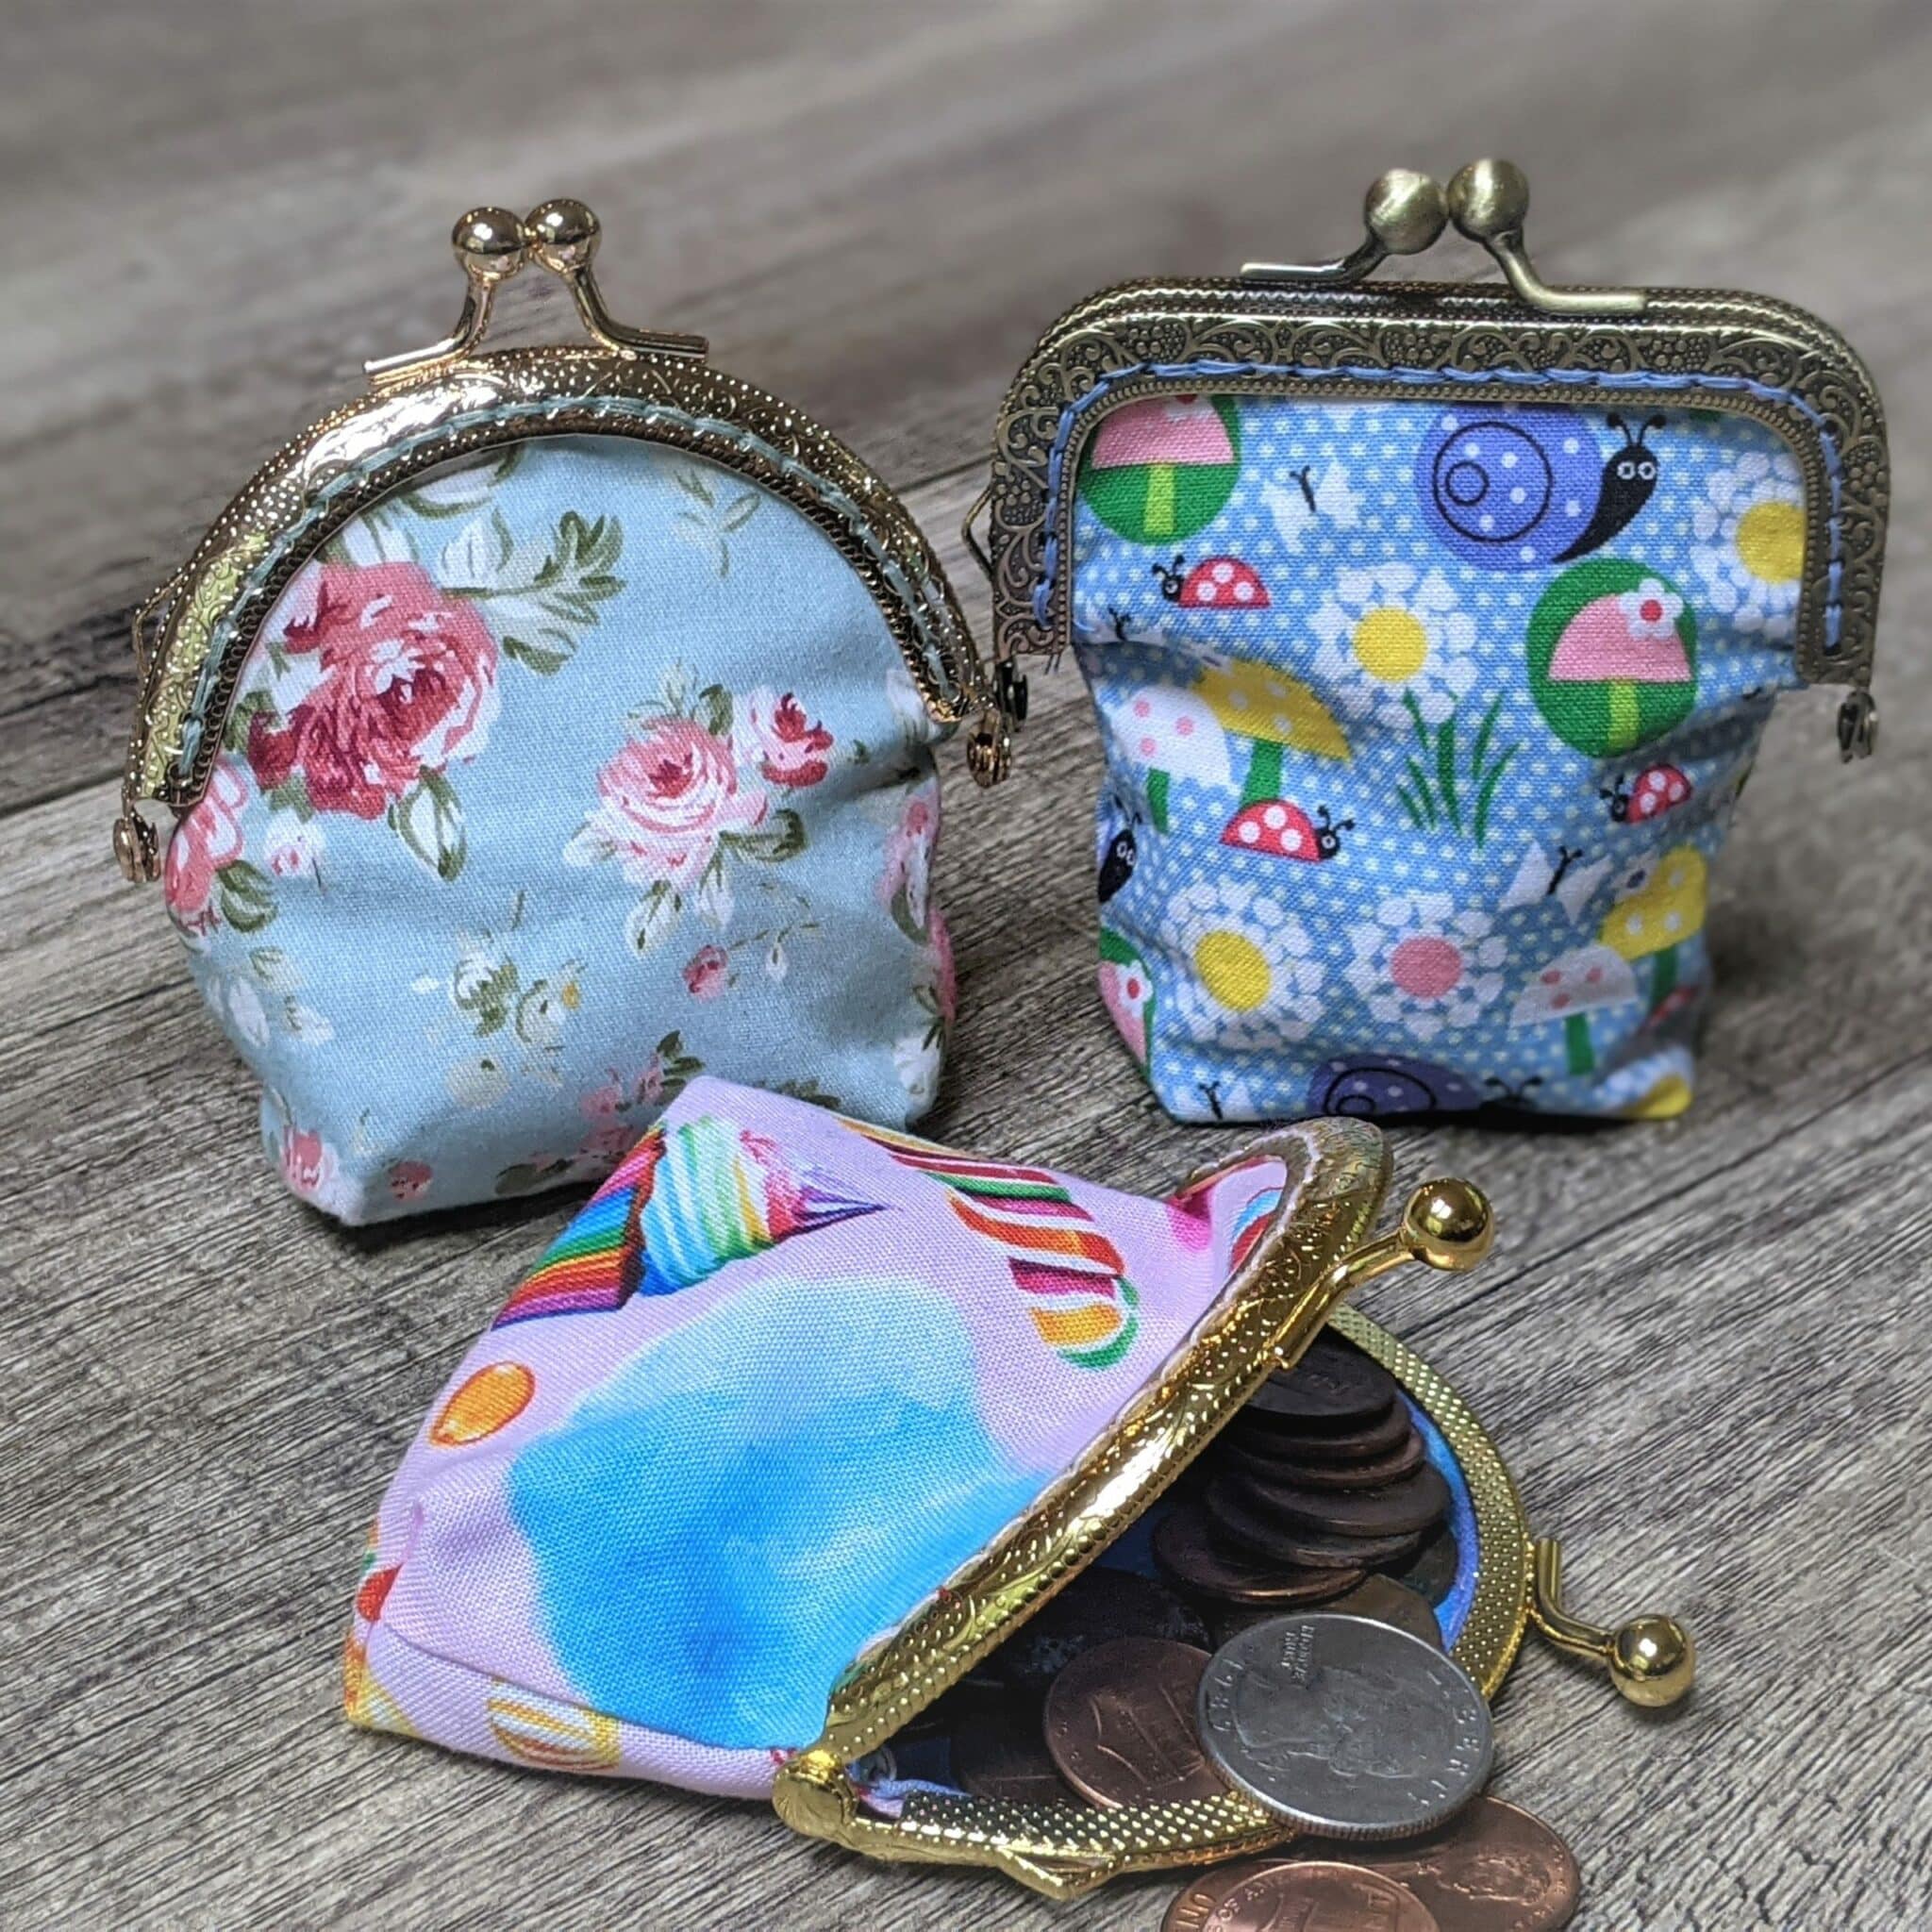 Monkey Coin Purse - Free Sewing Pattern | Craft Passion